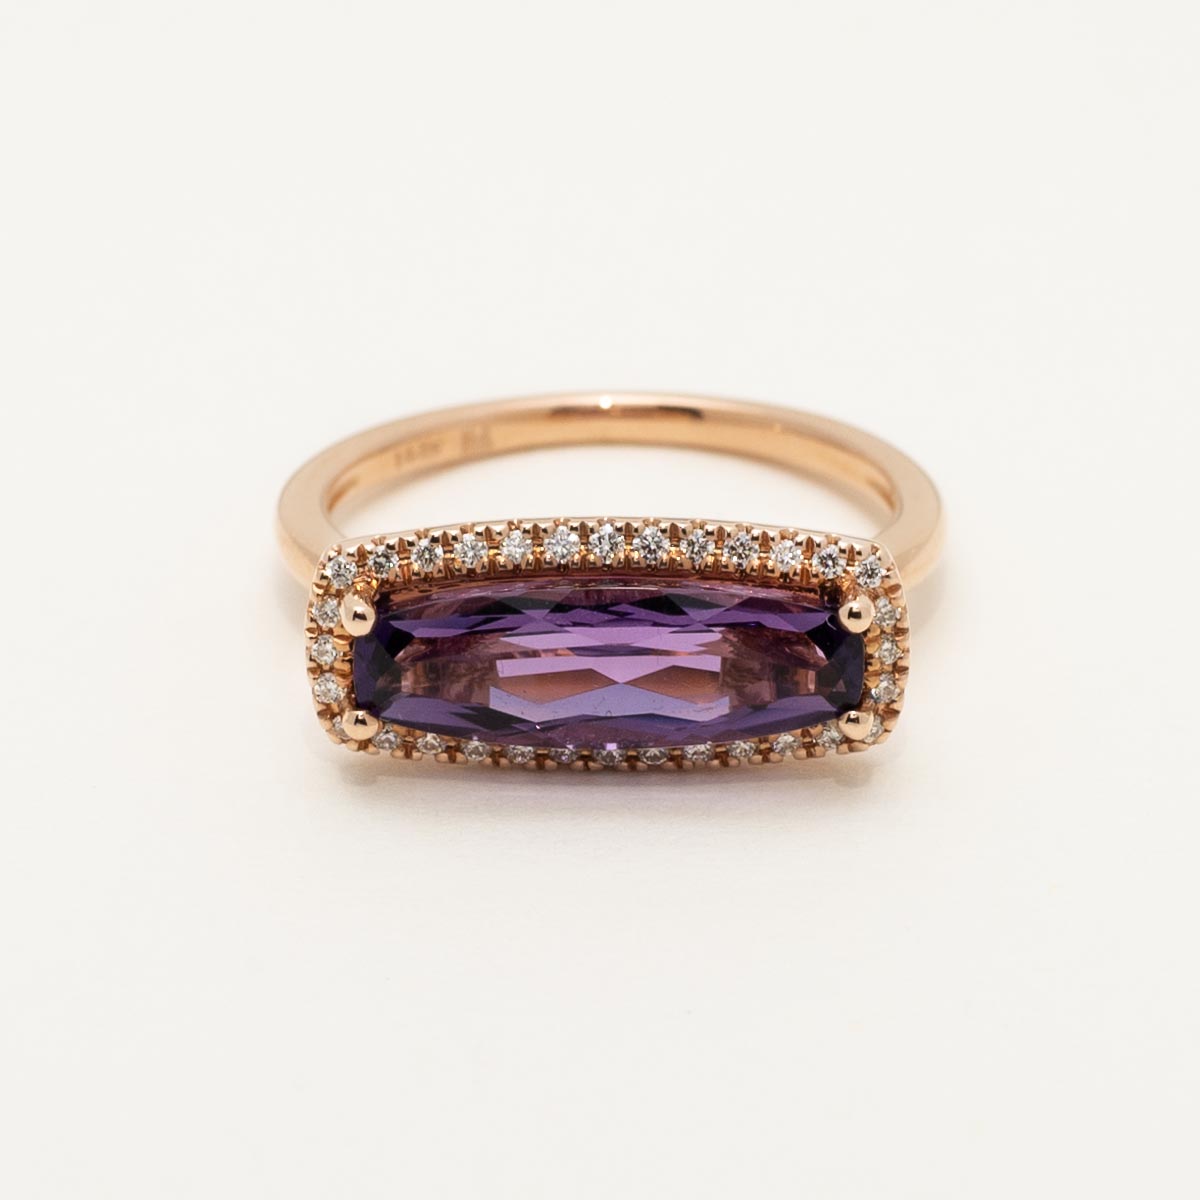 Cushion Cut Amethyst Ring in 14kt Rose Gold with Diamonds (1/7ct tw)